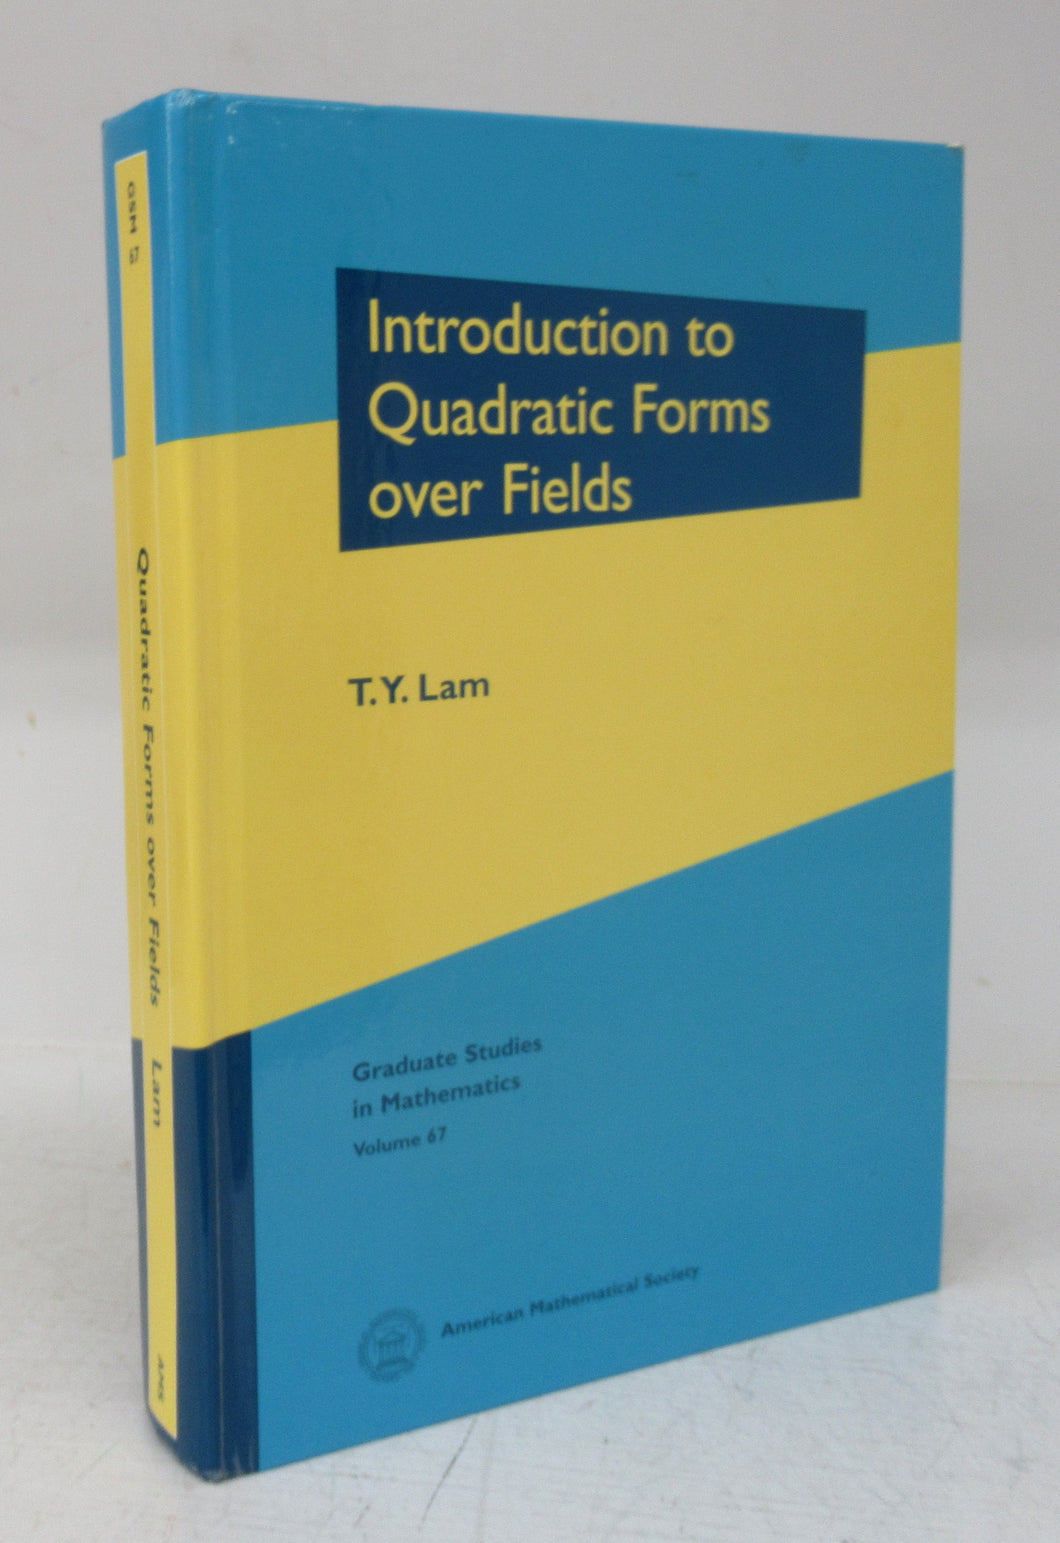 Introduction to Quadratic Forms over Fields